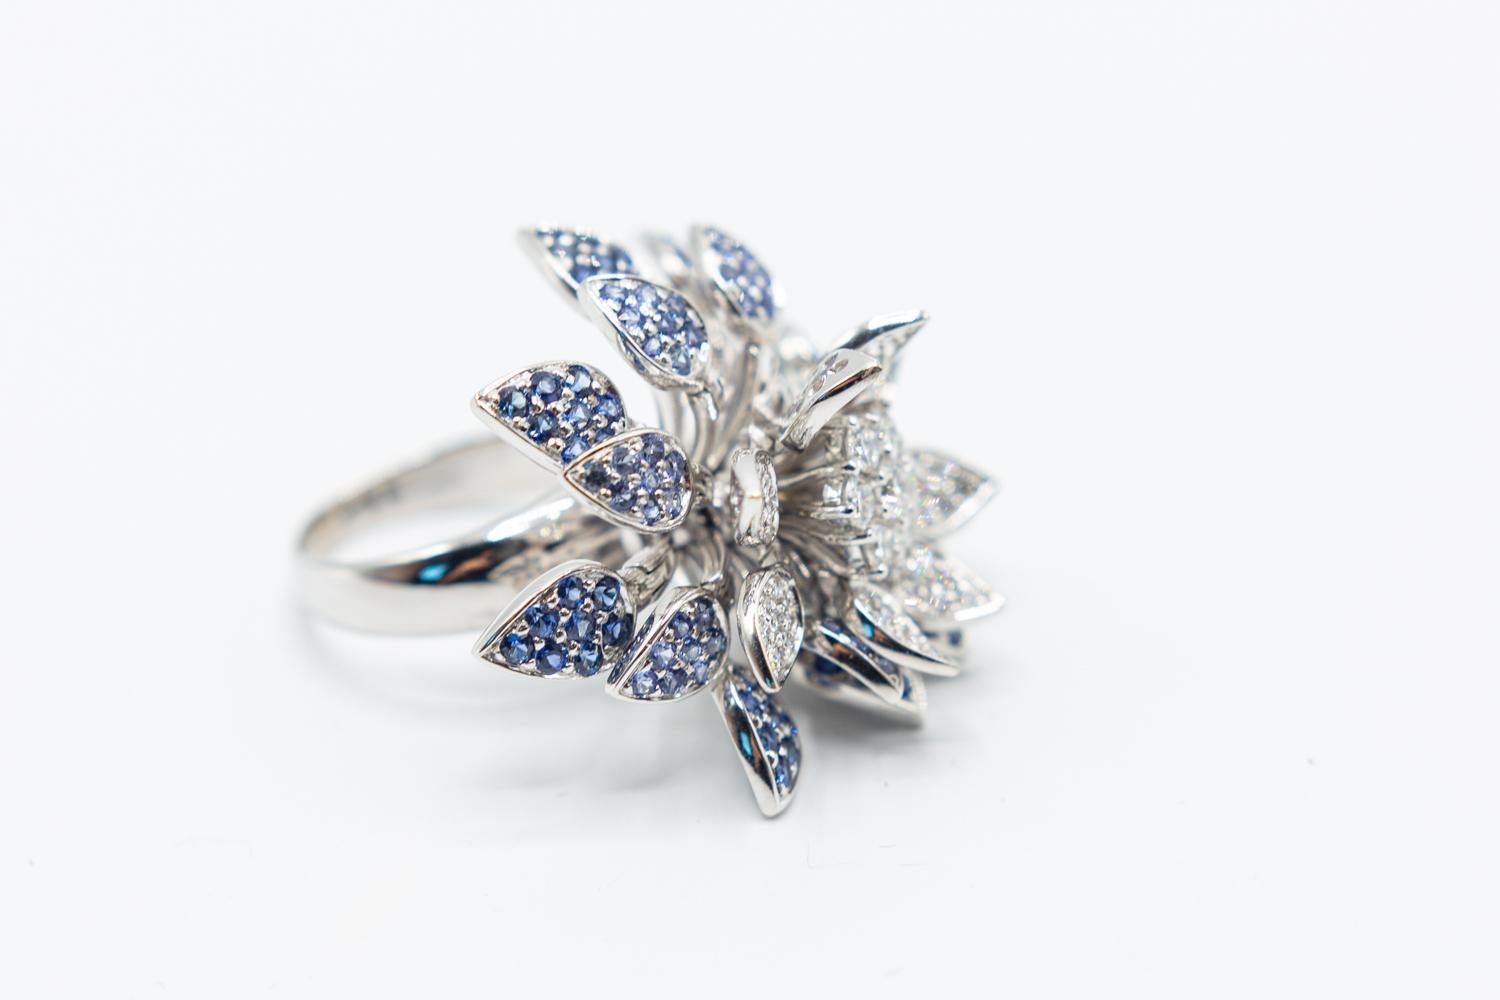 Effy 18K white gold floral cocktail ring featuring 1.49 carats of round brilliant diamonds, 1.28 carats of round brilliant blue sapphires and 0.90 carats of round brilliant light blue sapphires.